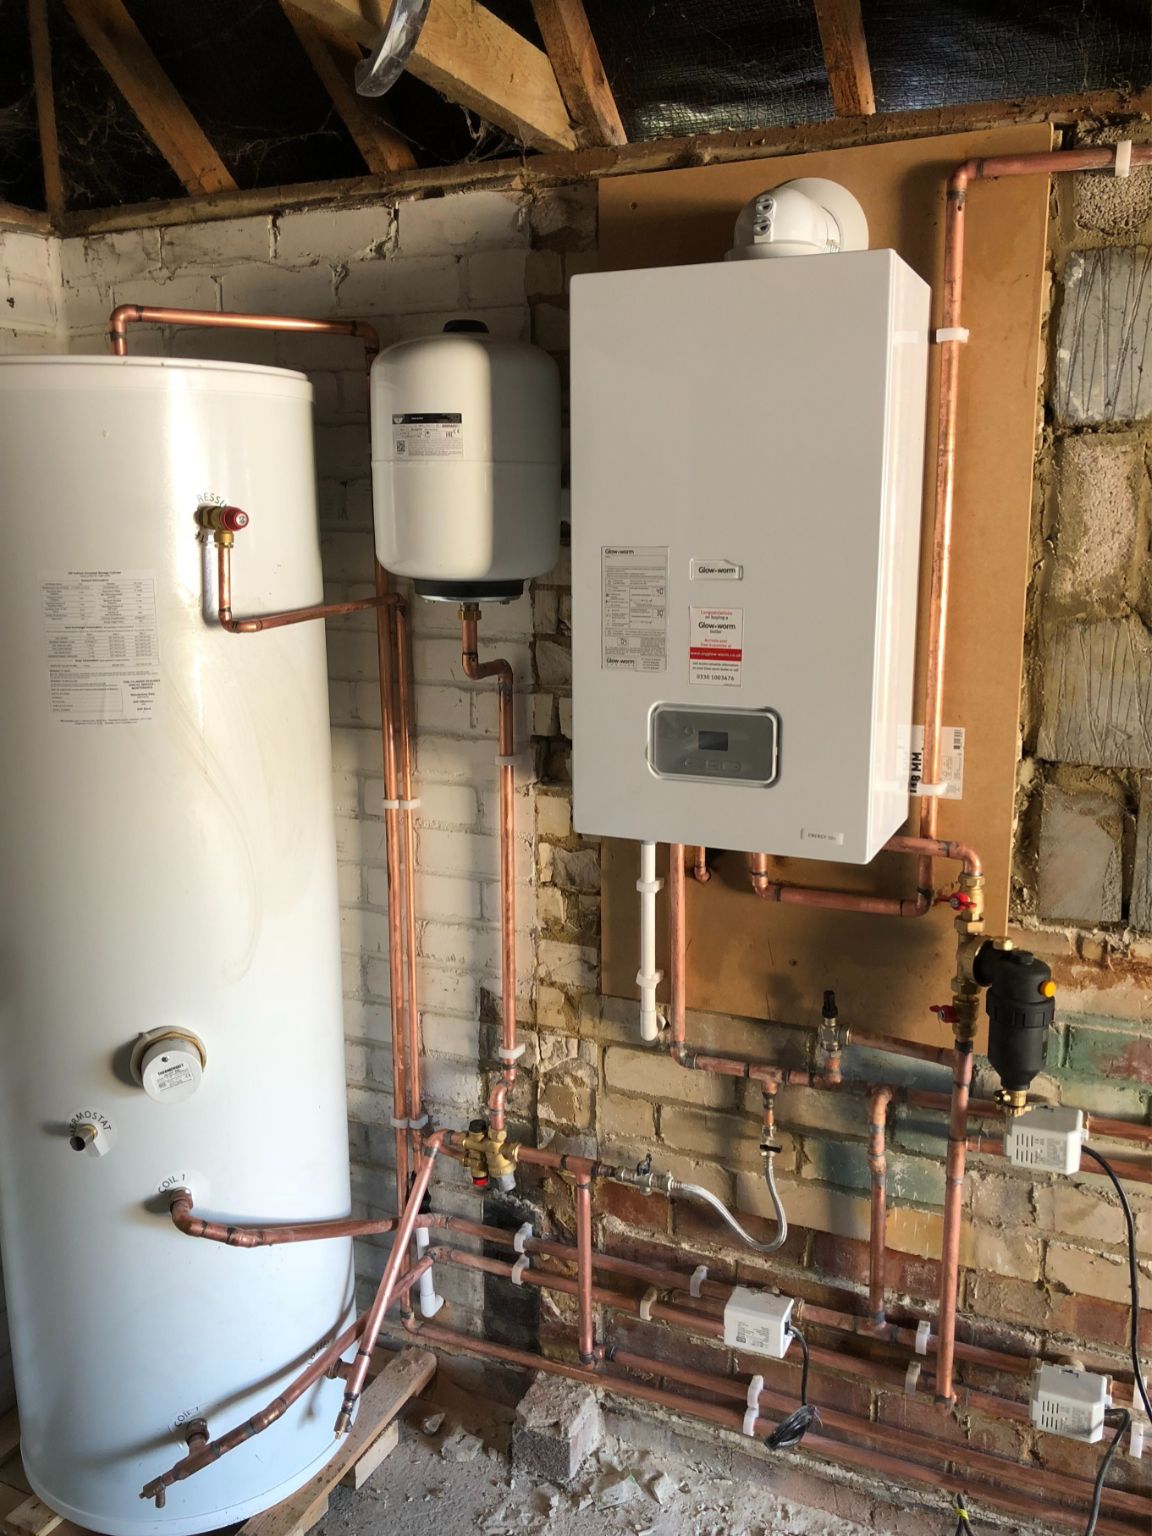 Indirect system with underfloor heating and Glowworm energy boiler